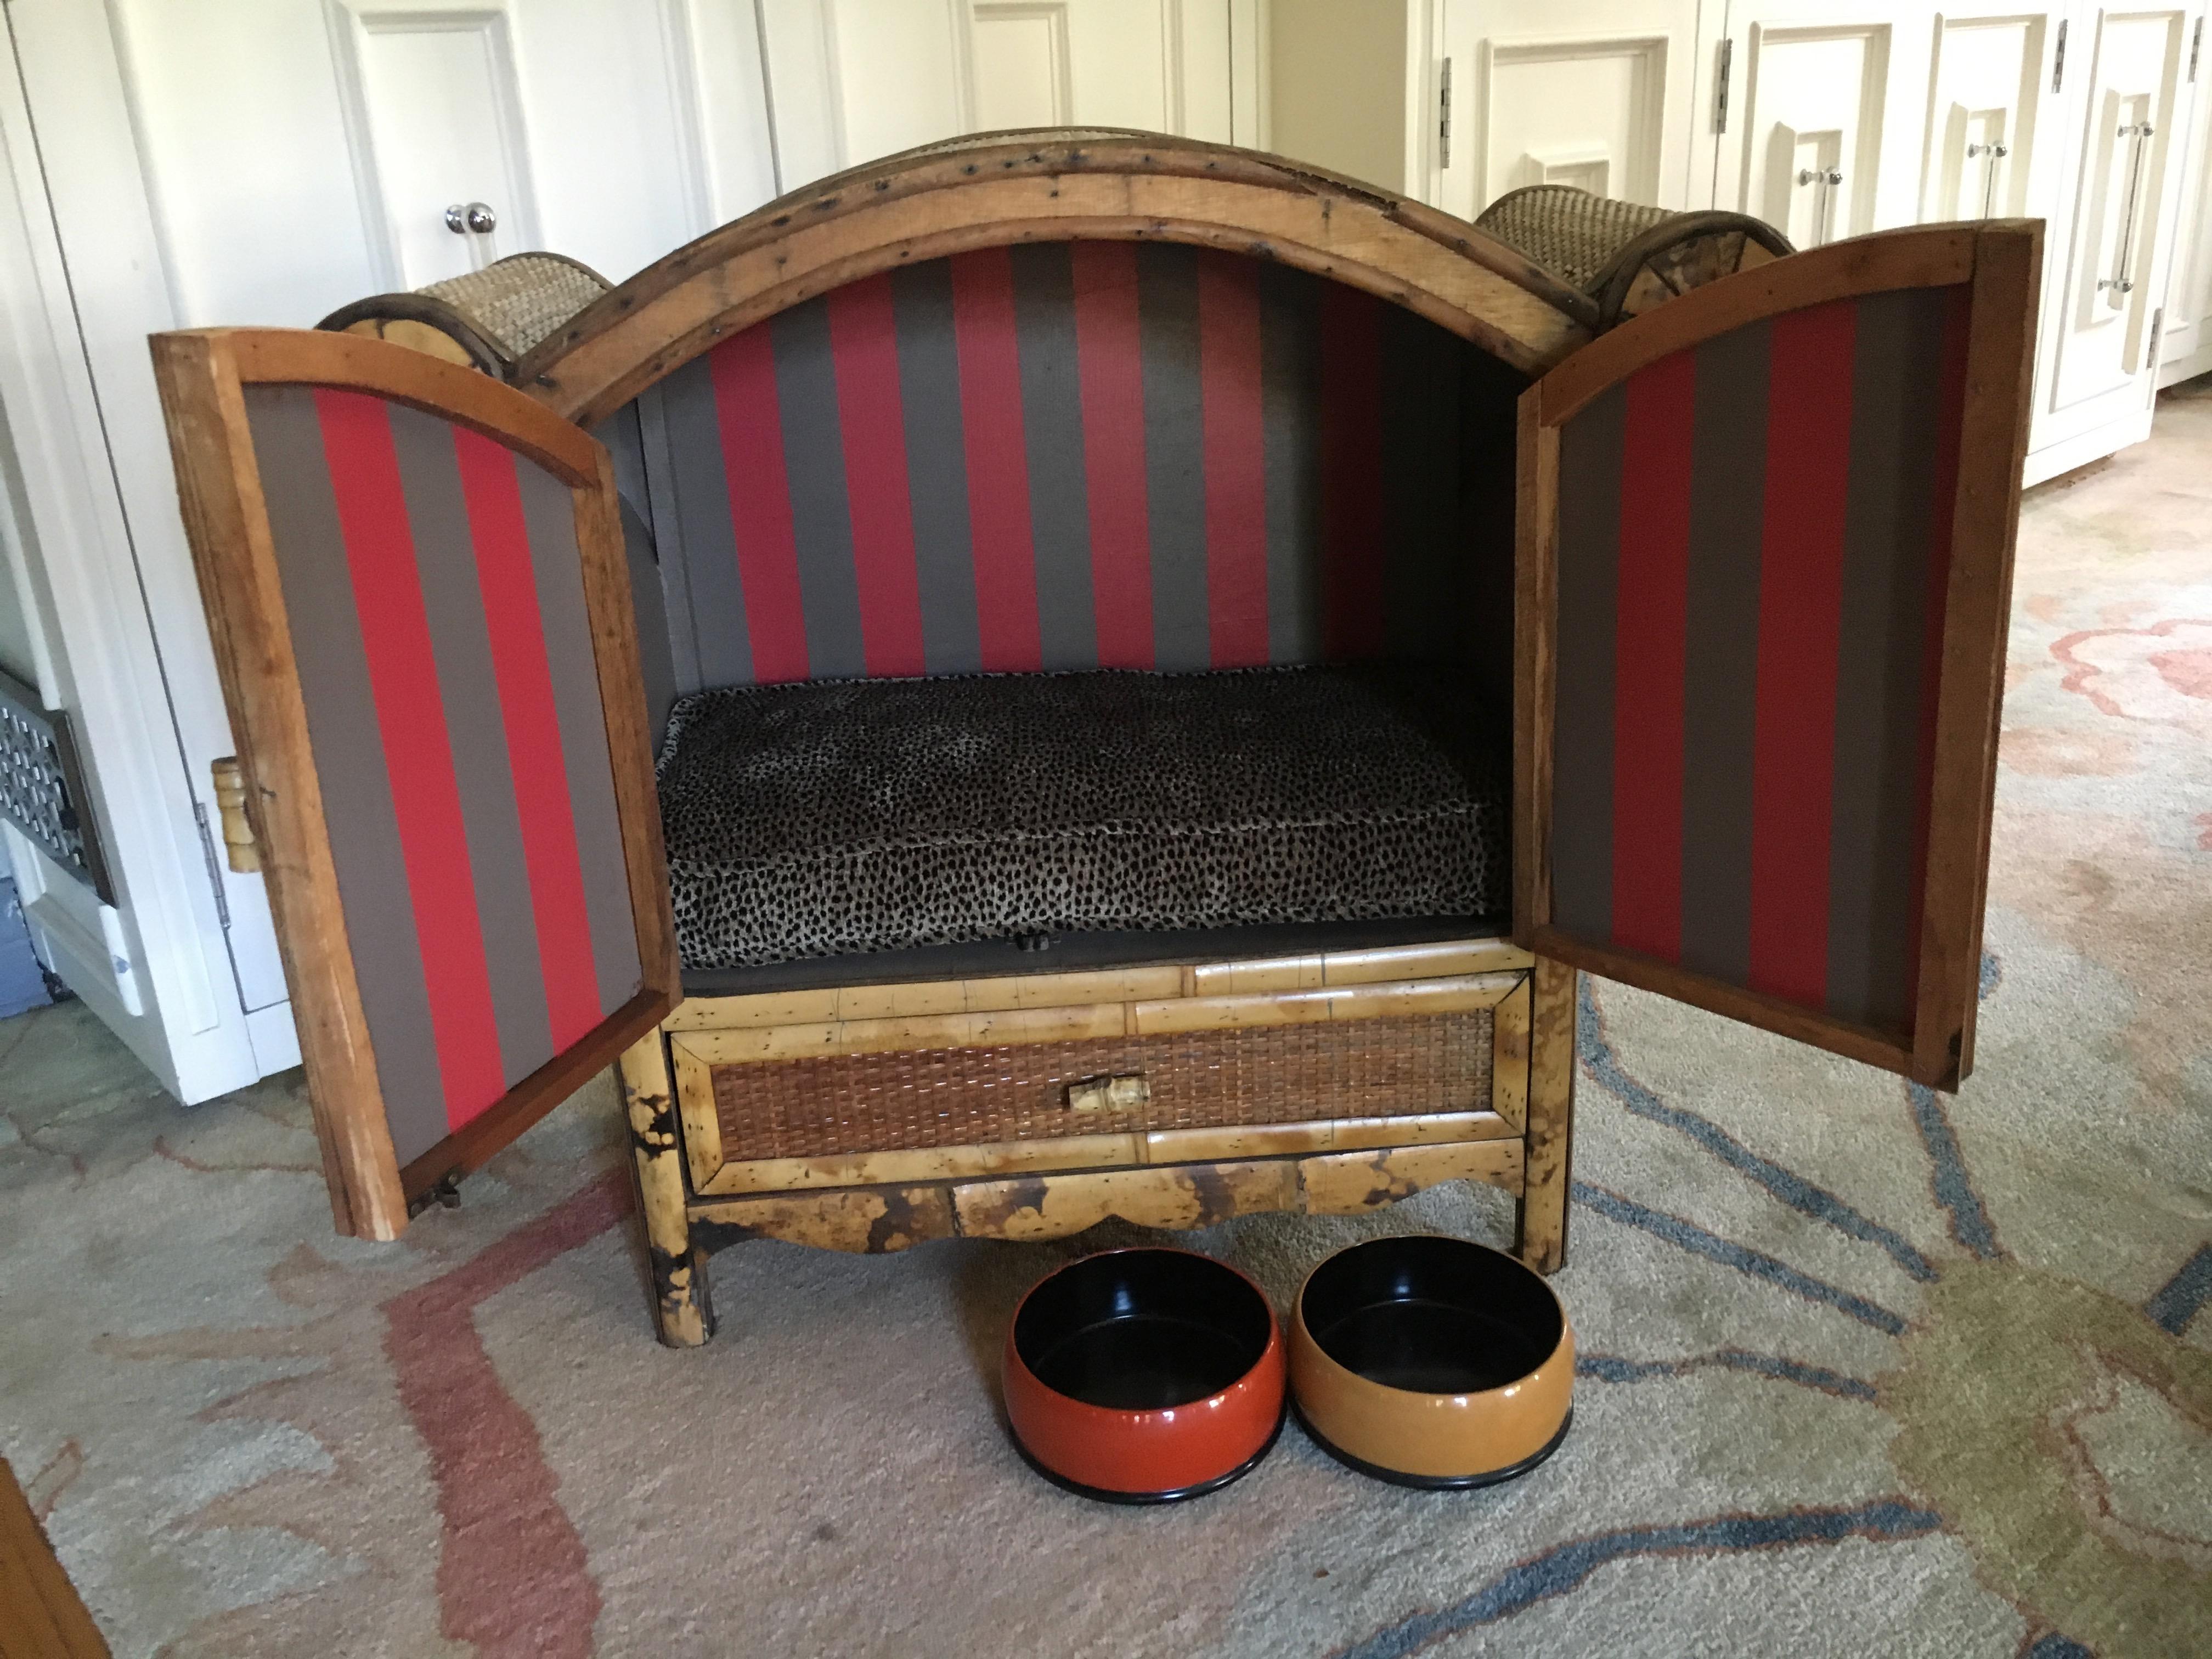 Once a small bamboo cabinet, we have modified the interior by adding painted stripes and a custom 